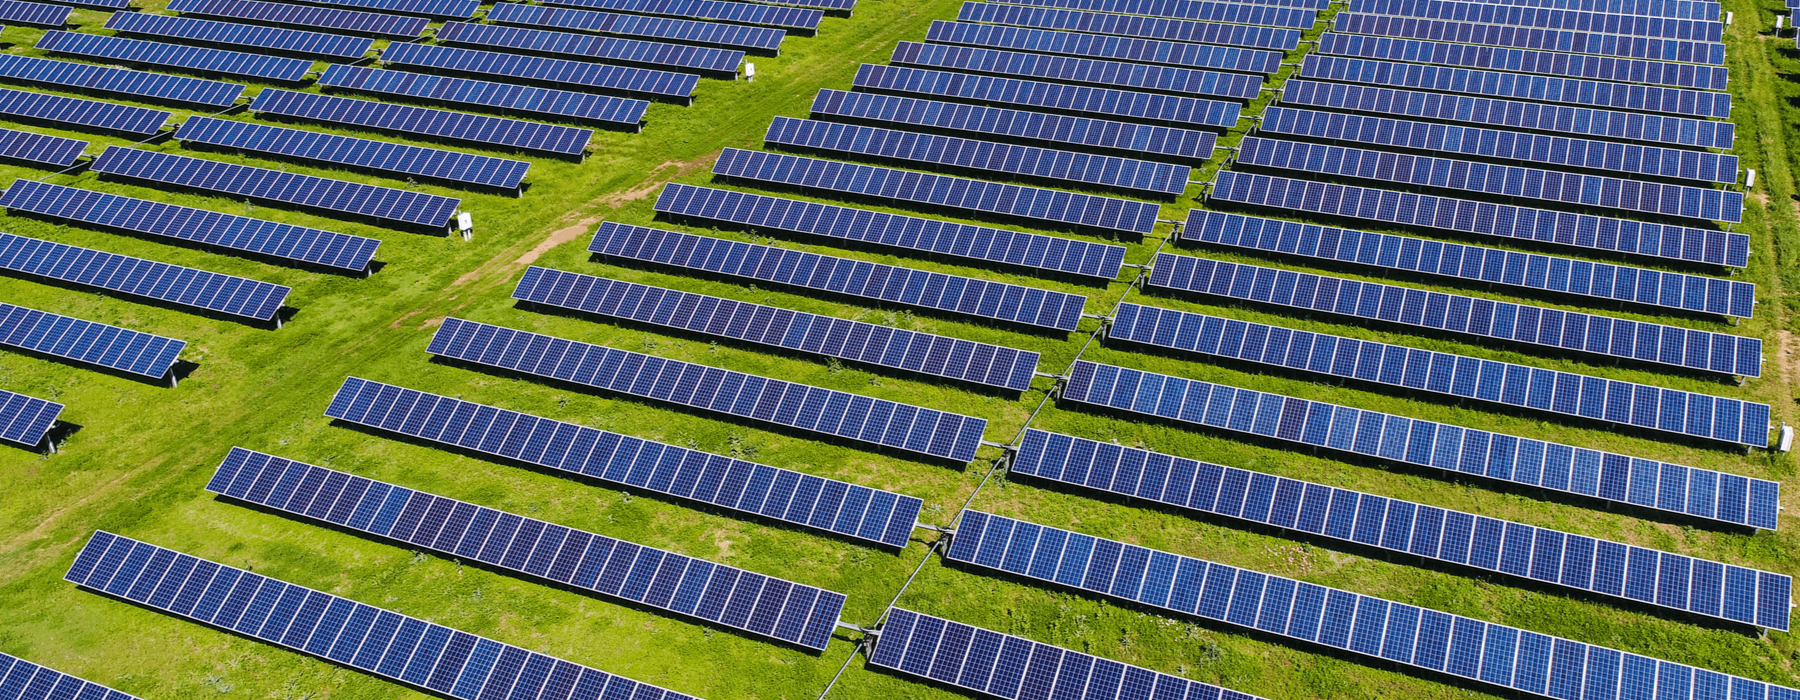 US Solar Power Surpasses 100 GW, While Costs Continue to Drop